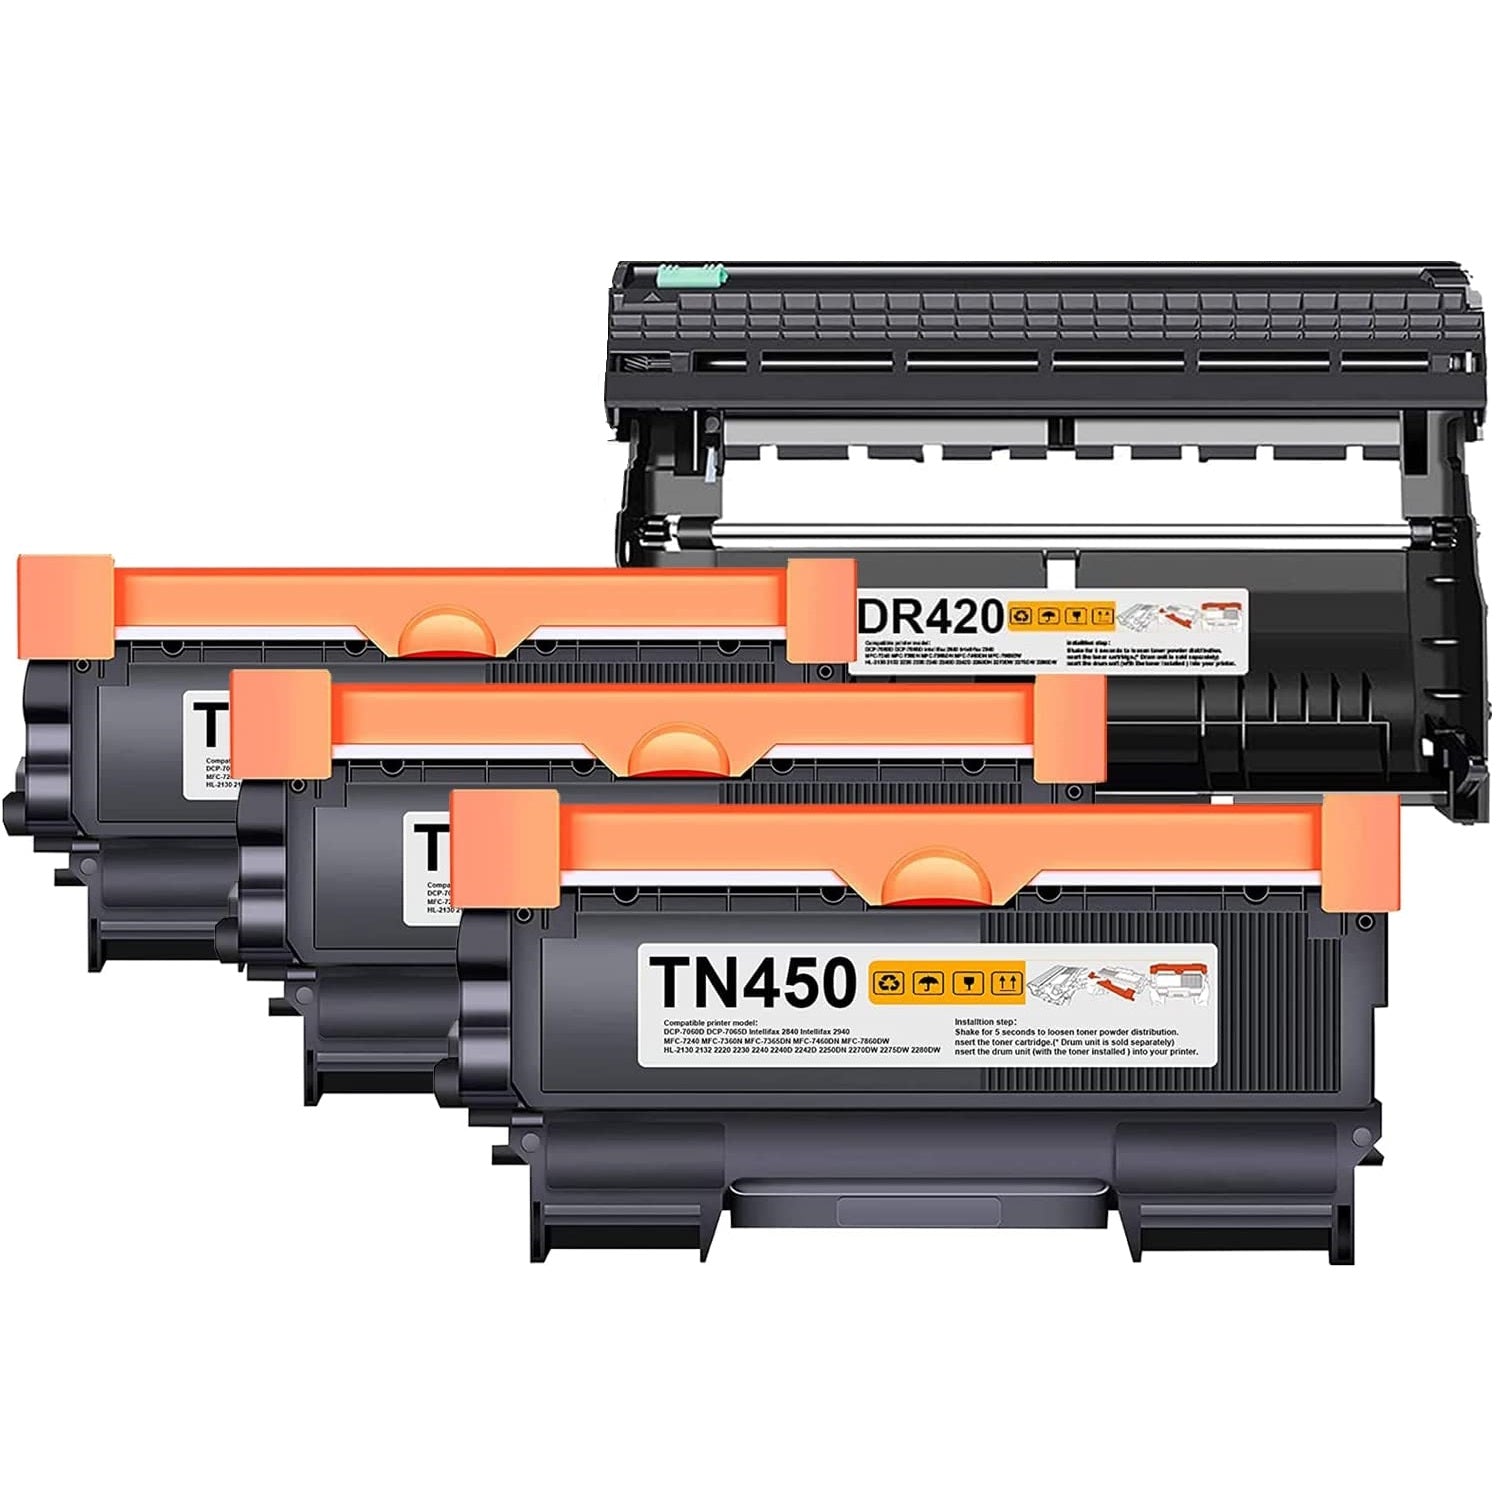 Absolute Toner Compatible Brother TN-450 Pack 3 and DR-420 Pack 1 Drum Unit Combo Pack Cartridge Brother Toner Cartridges